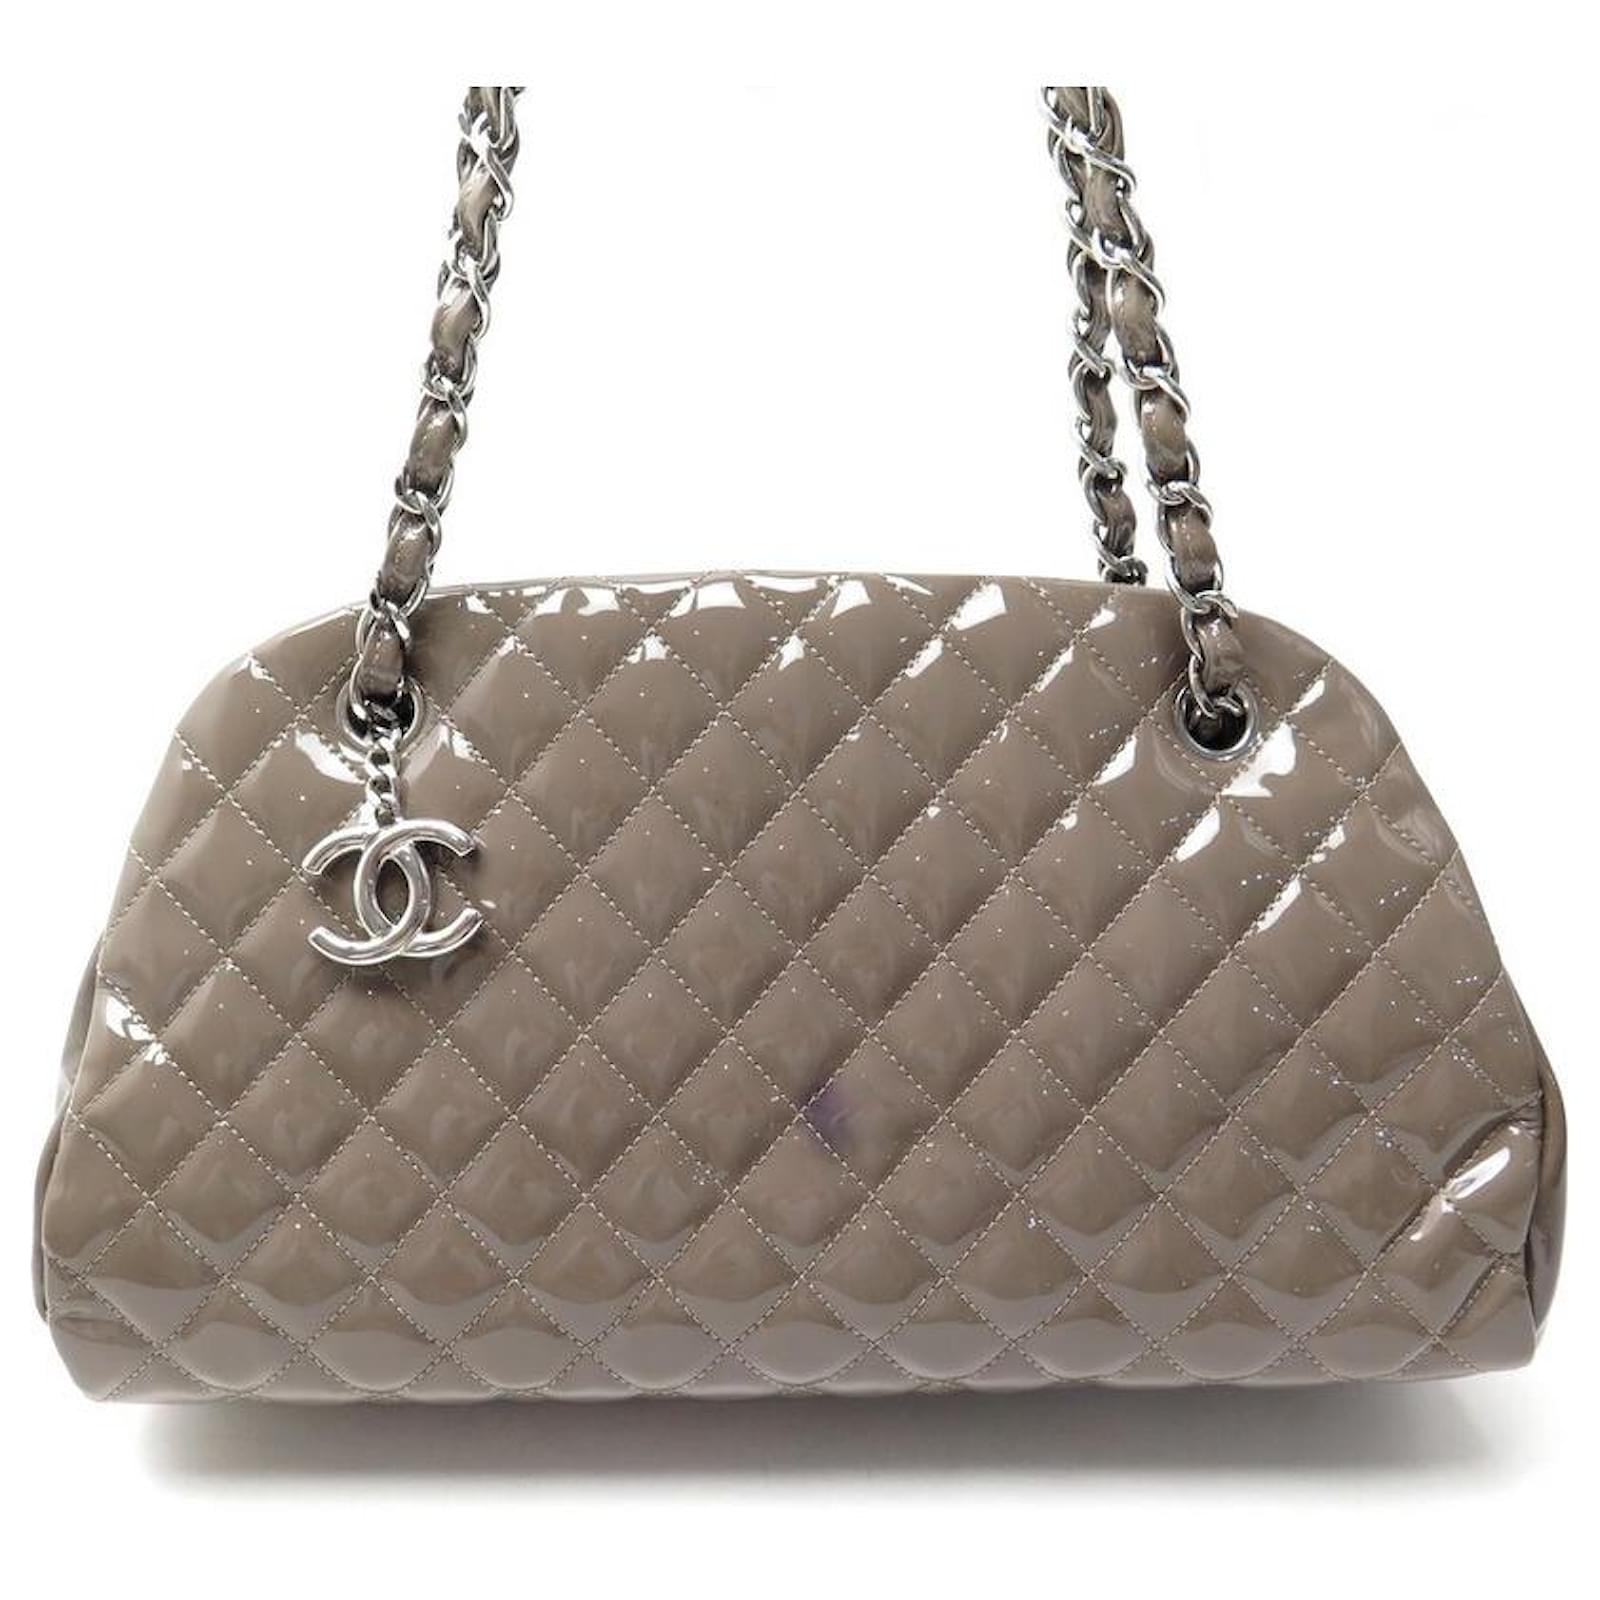 NEW CHANEL BOWLING HANDBAG MADEMOISELLE PATENT LEATHER QUILTED TAUPE